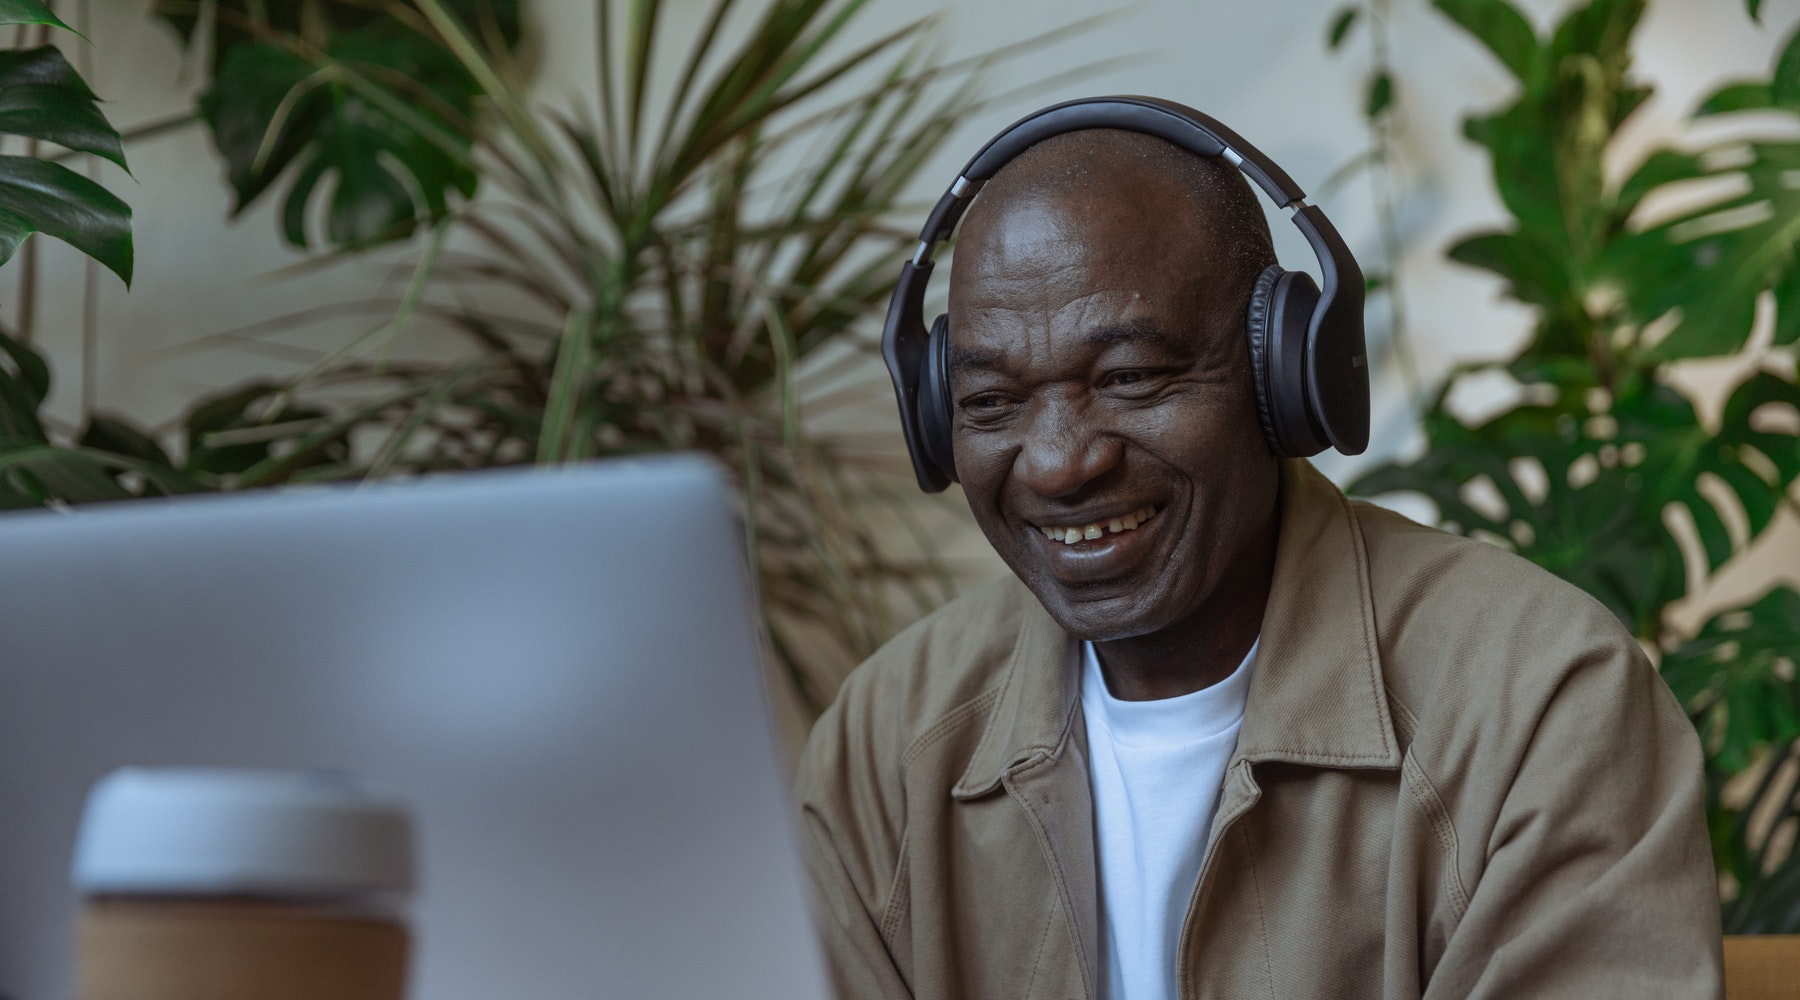 main smiling at computer while wearing headphones